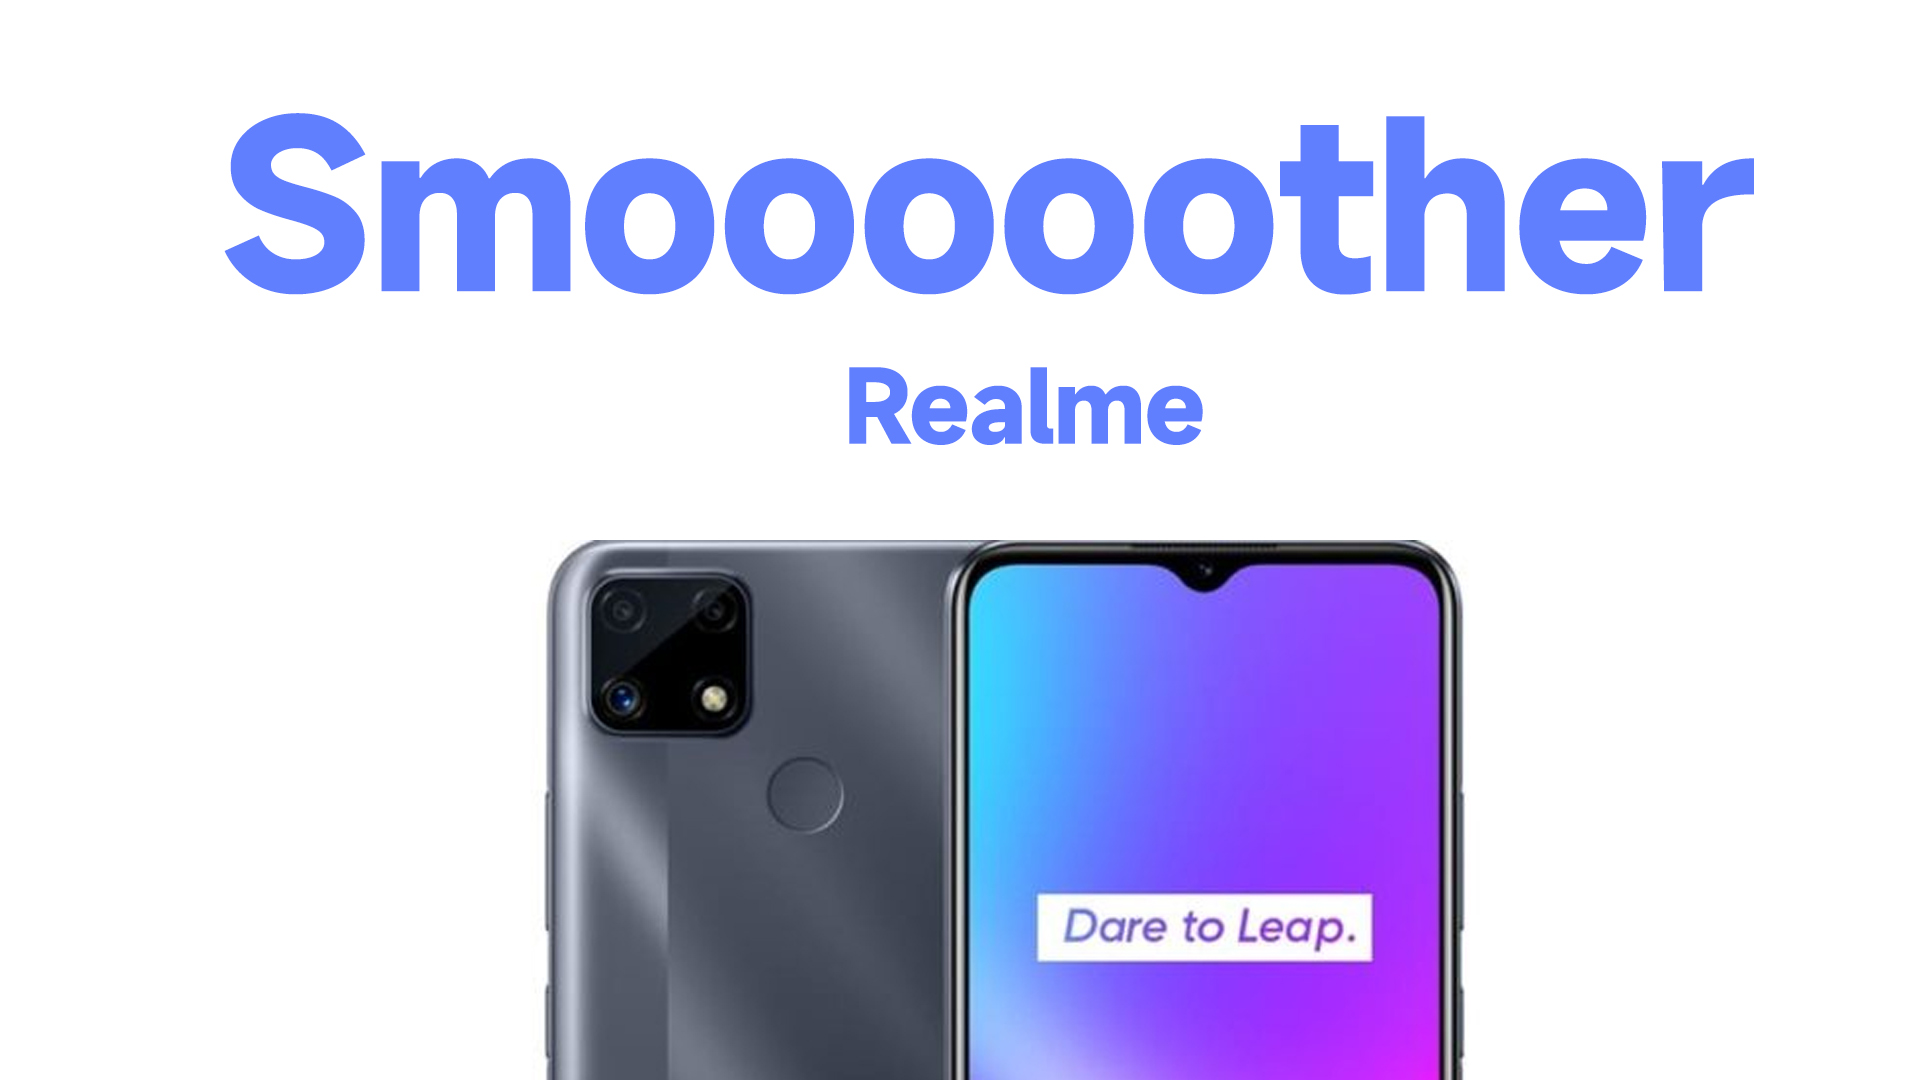 How to make Realme phone smoother